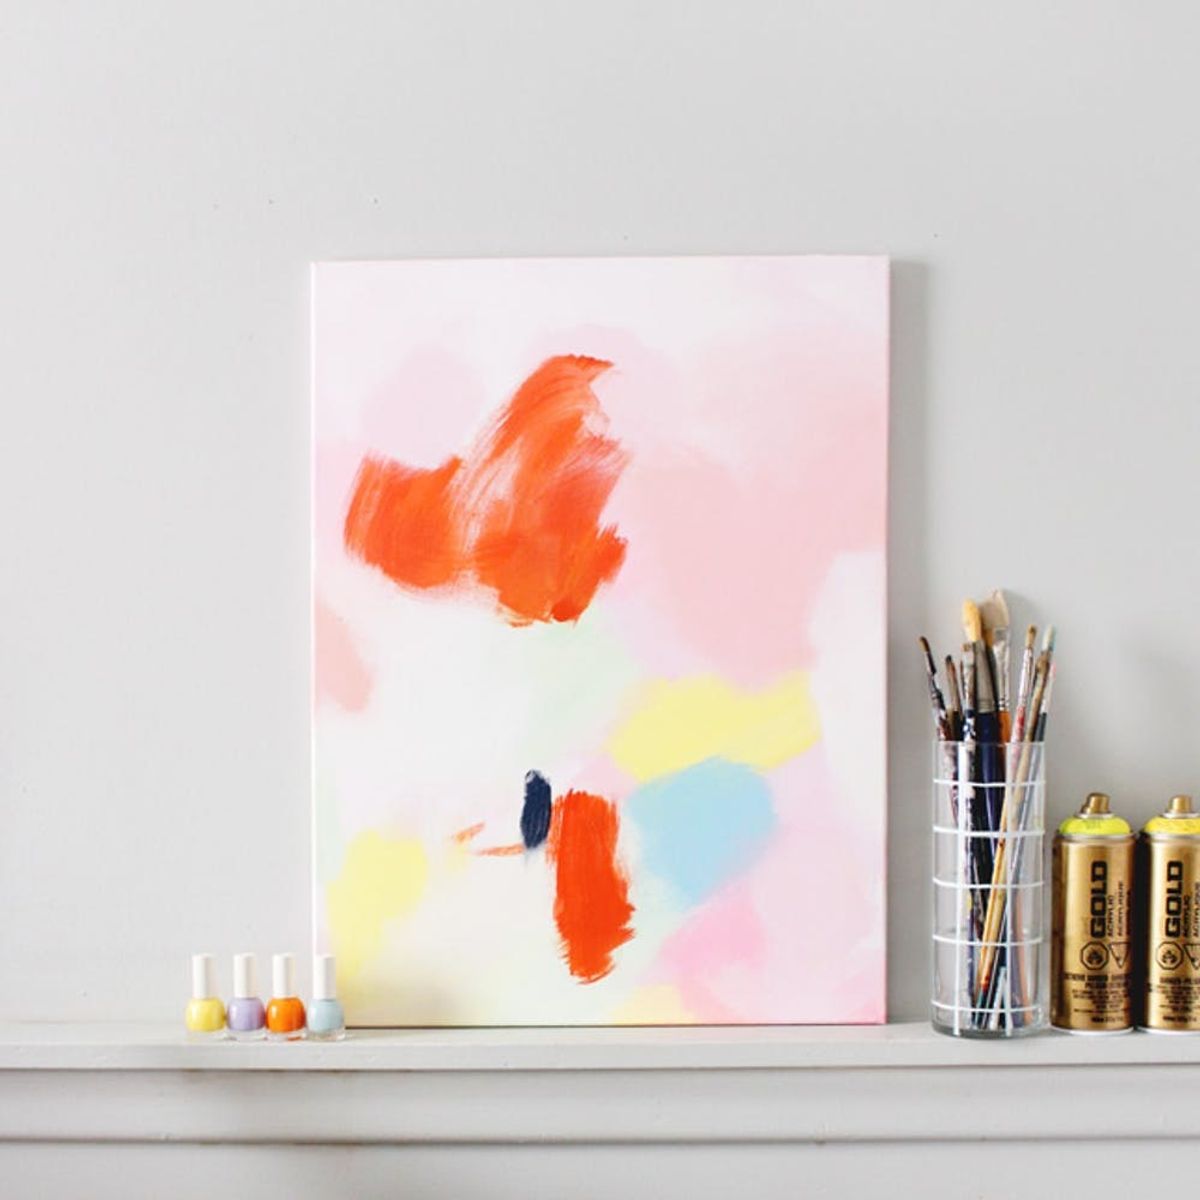 How to Make This $3600 Anthropologie Acrylic Wall Art for Next to Nothing